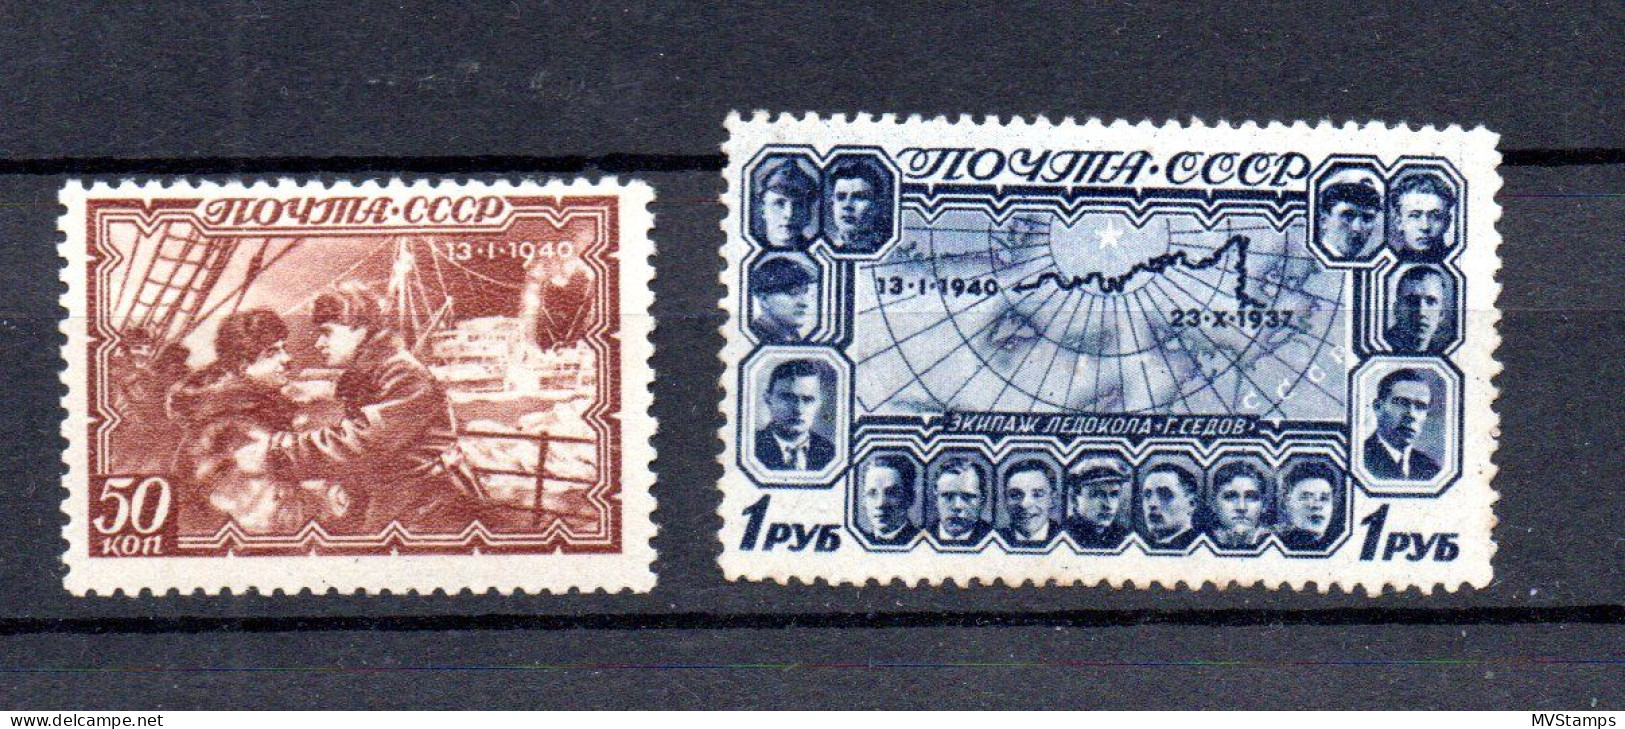 Russia 1940 Old Polar Stamps "G. Sedow" (Michel 743/44) MLH - Nuovi